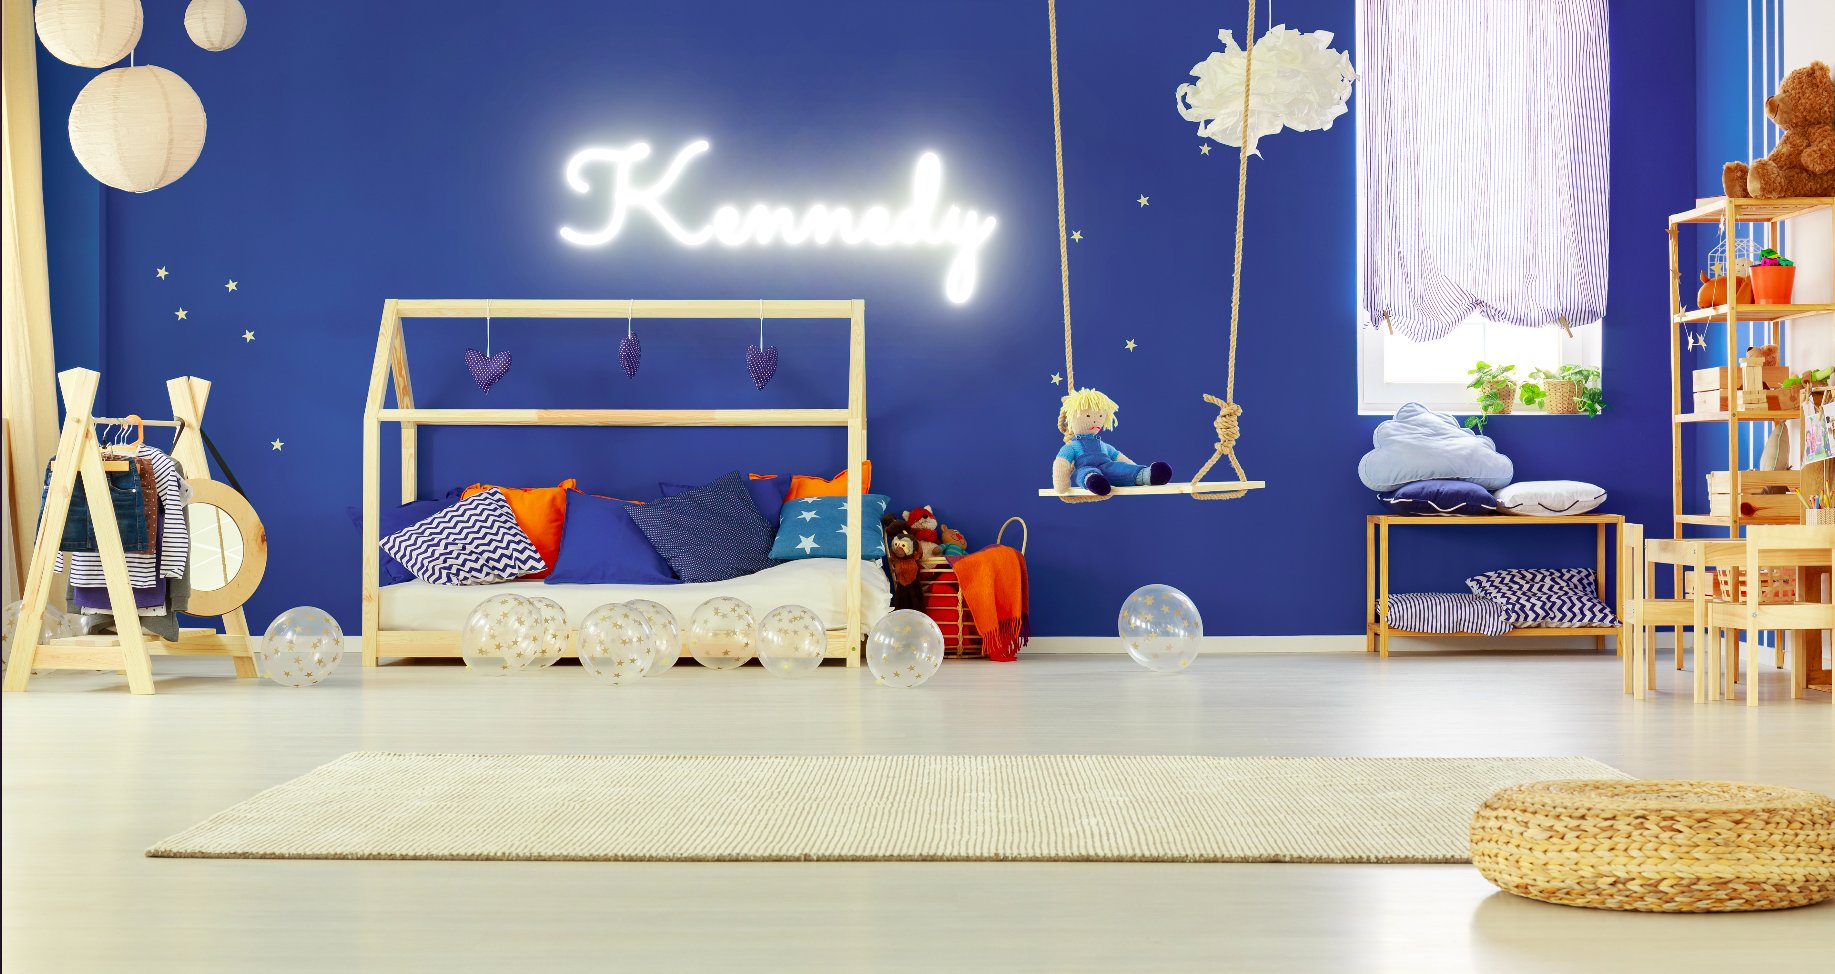 "Kennedy" Baby Name LED Neon Sign